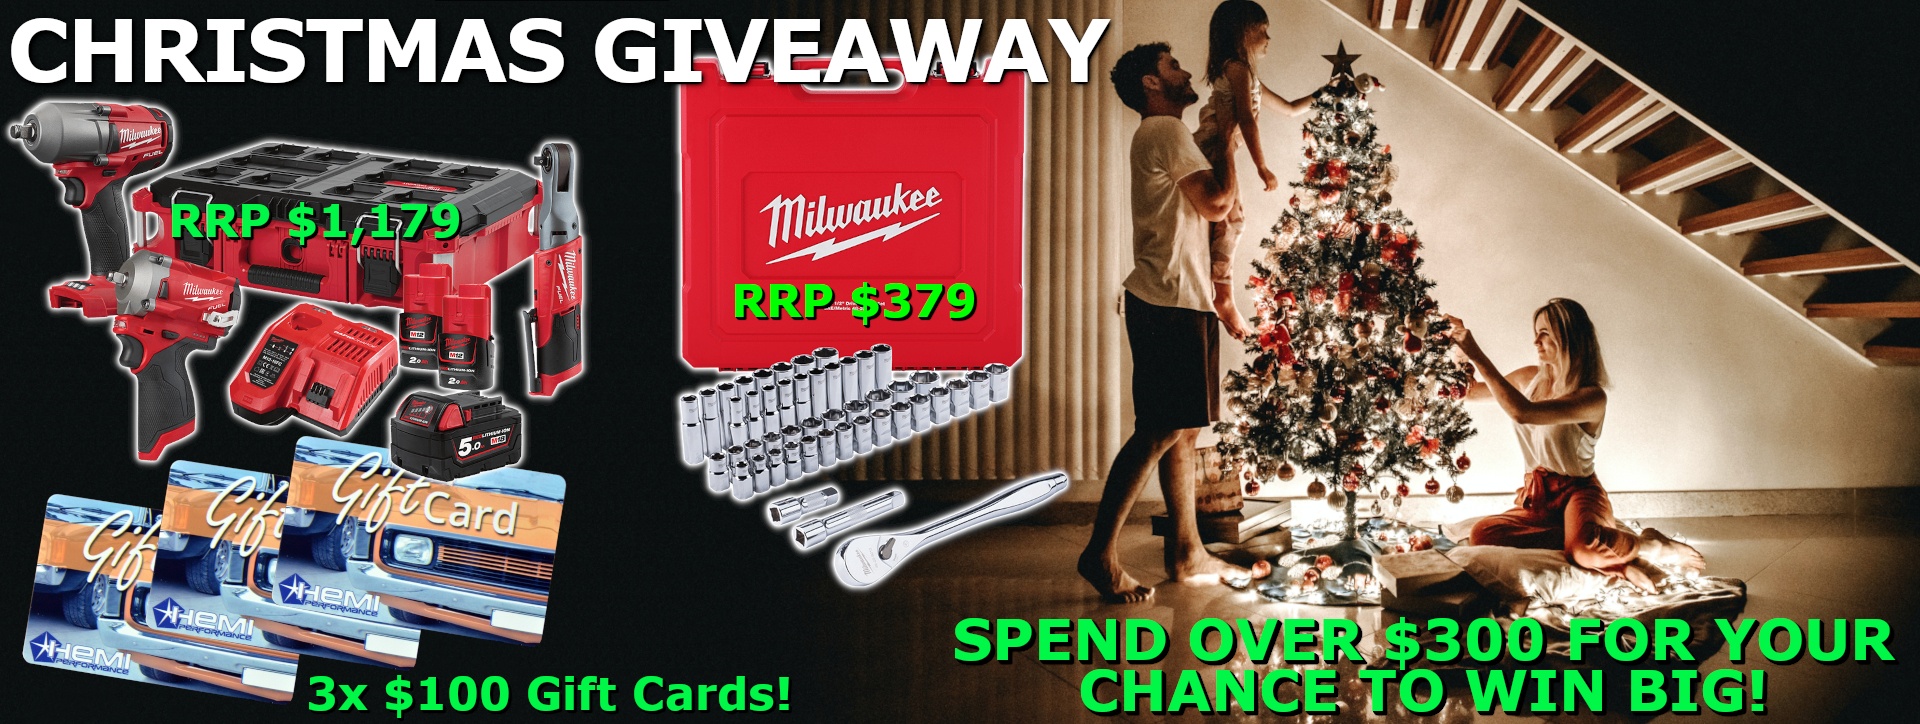 CHRISTMAS GIVEAWAY! Spend over $300 for your chance to win big!